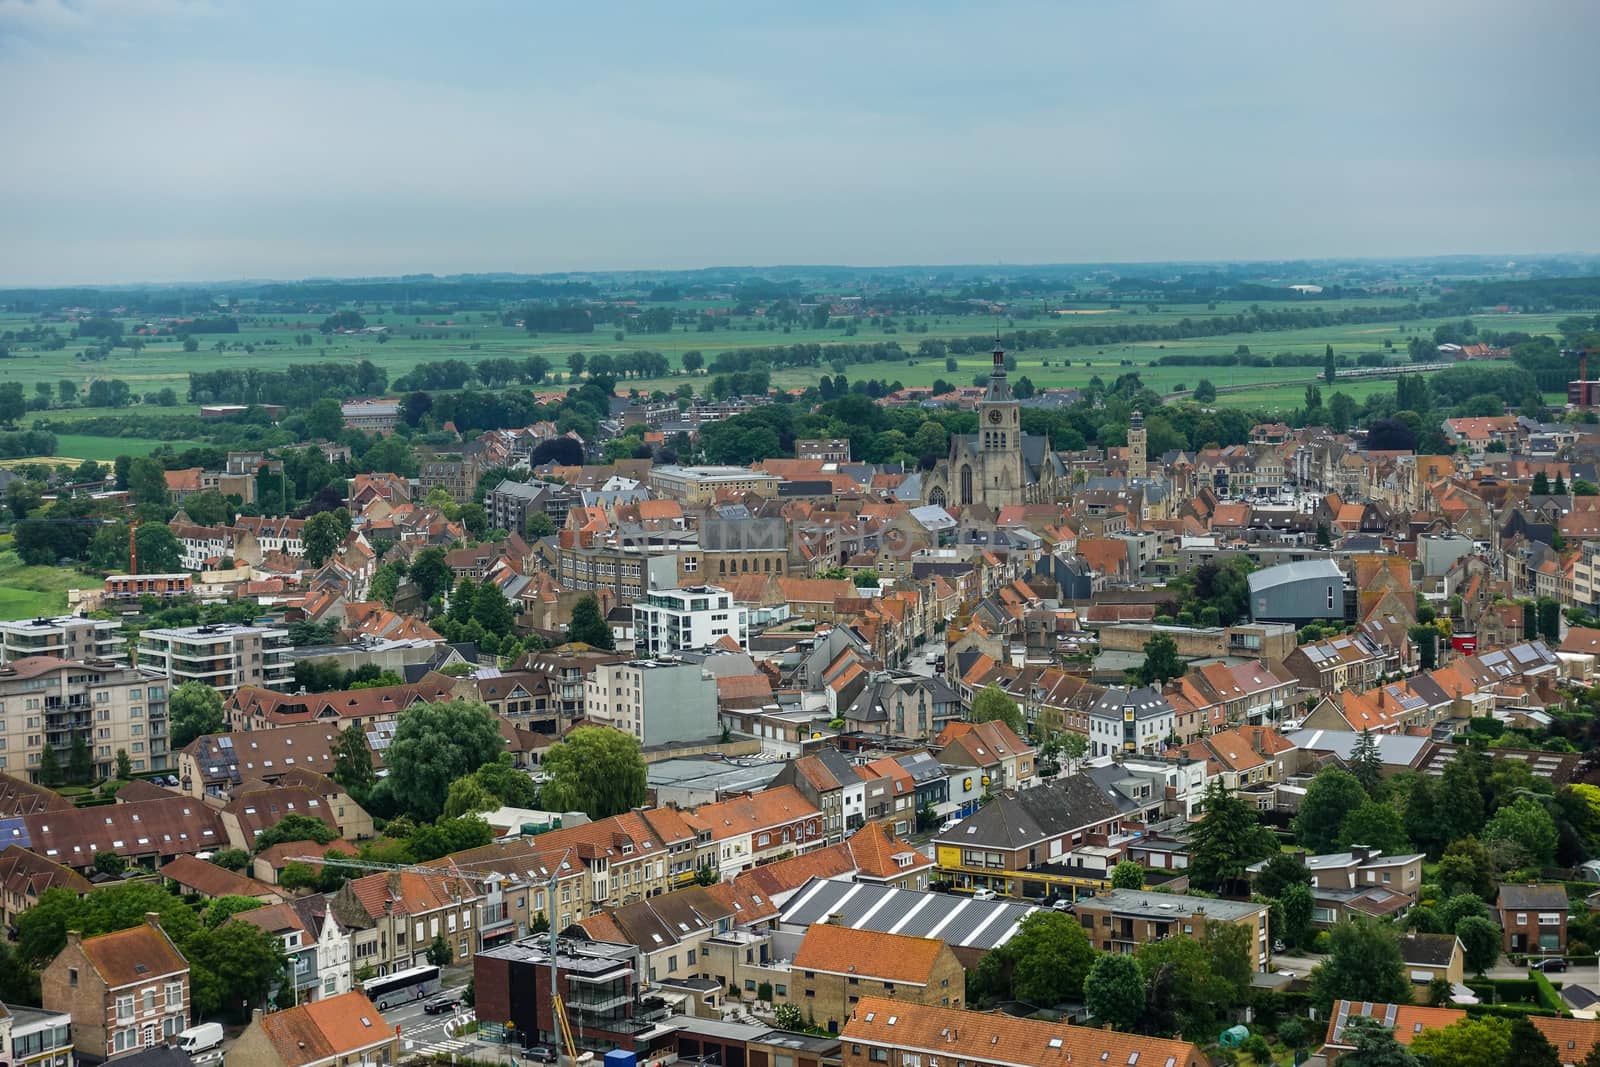 Diksmuide, Flanders, Belgium -  June 19, 2019: View on dowtown from up IJzertoren, tallest peace monument of WW 1. Brick buildings with red roofs, towers of church and city hall, green pasture.